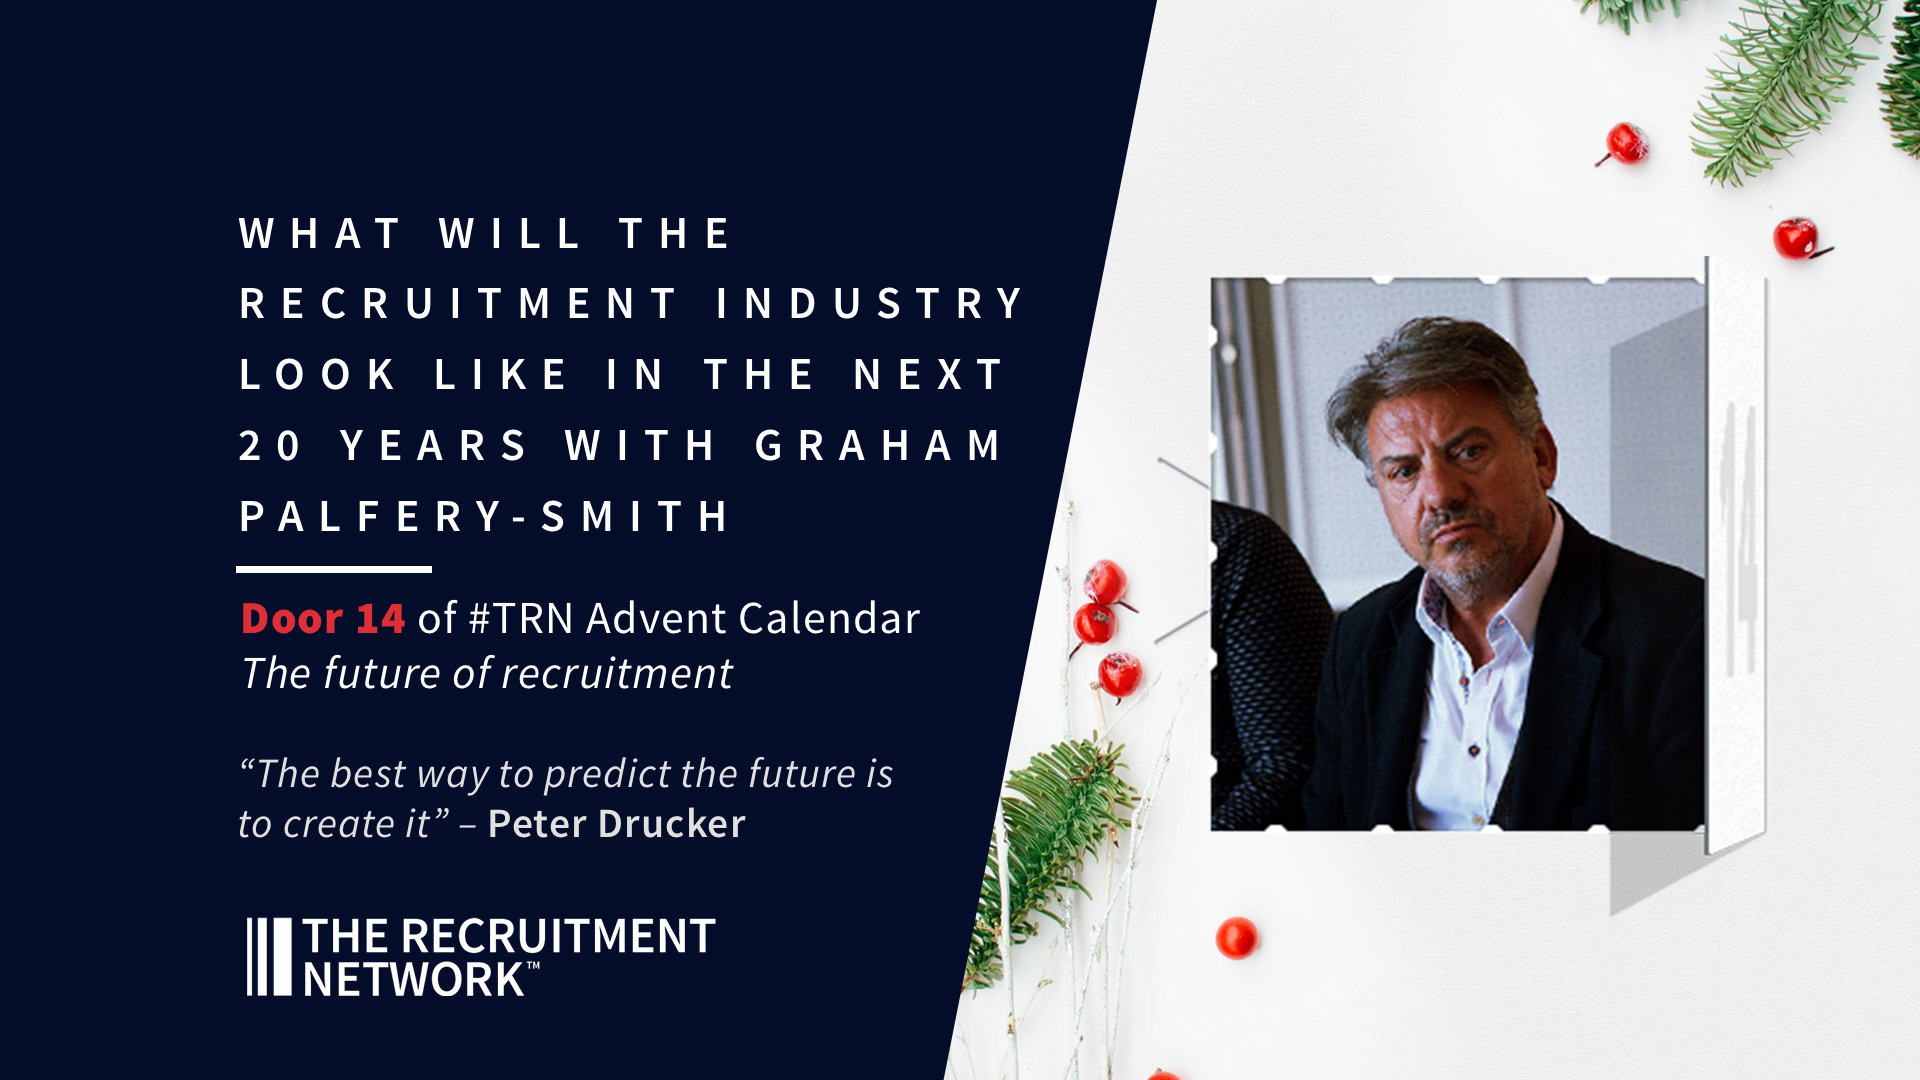 What will the recruitment industry look like in the next 20 years with Graham Palfery-Smith